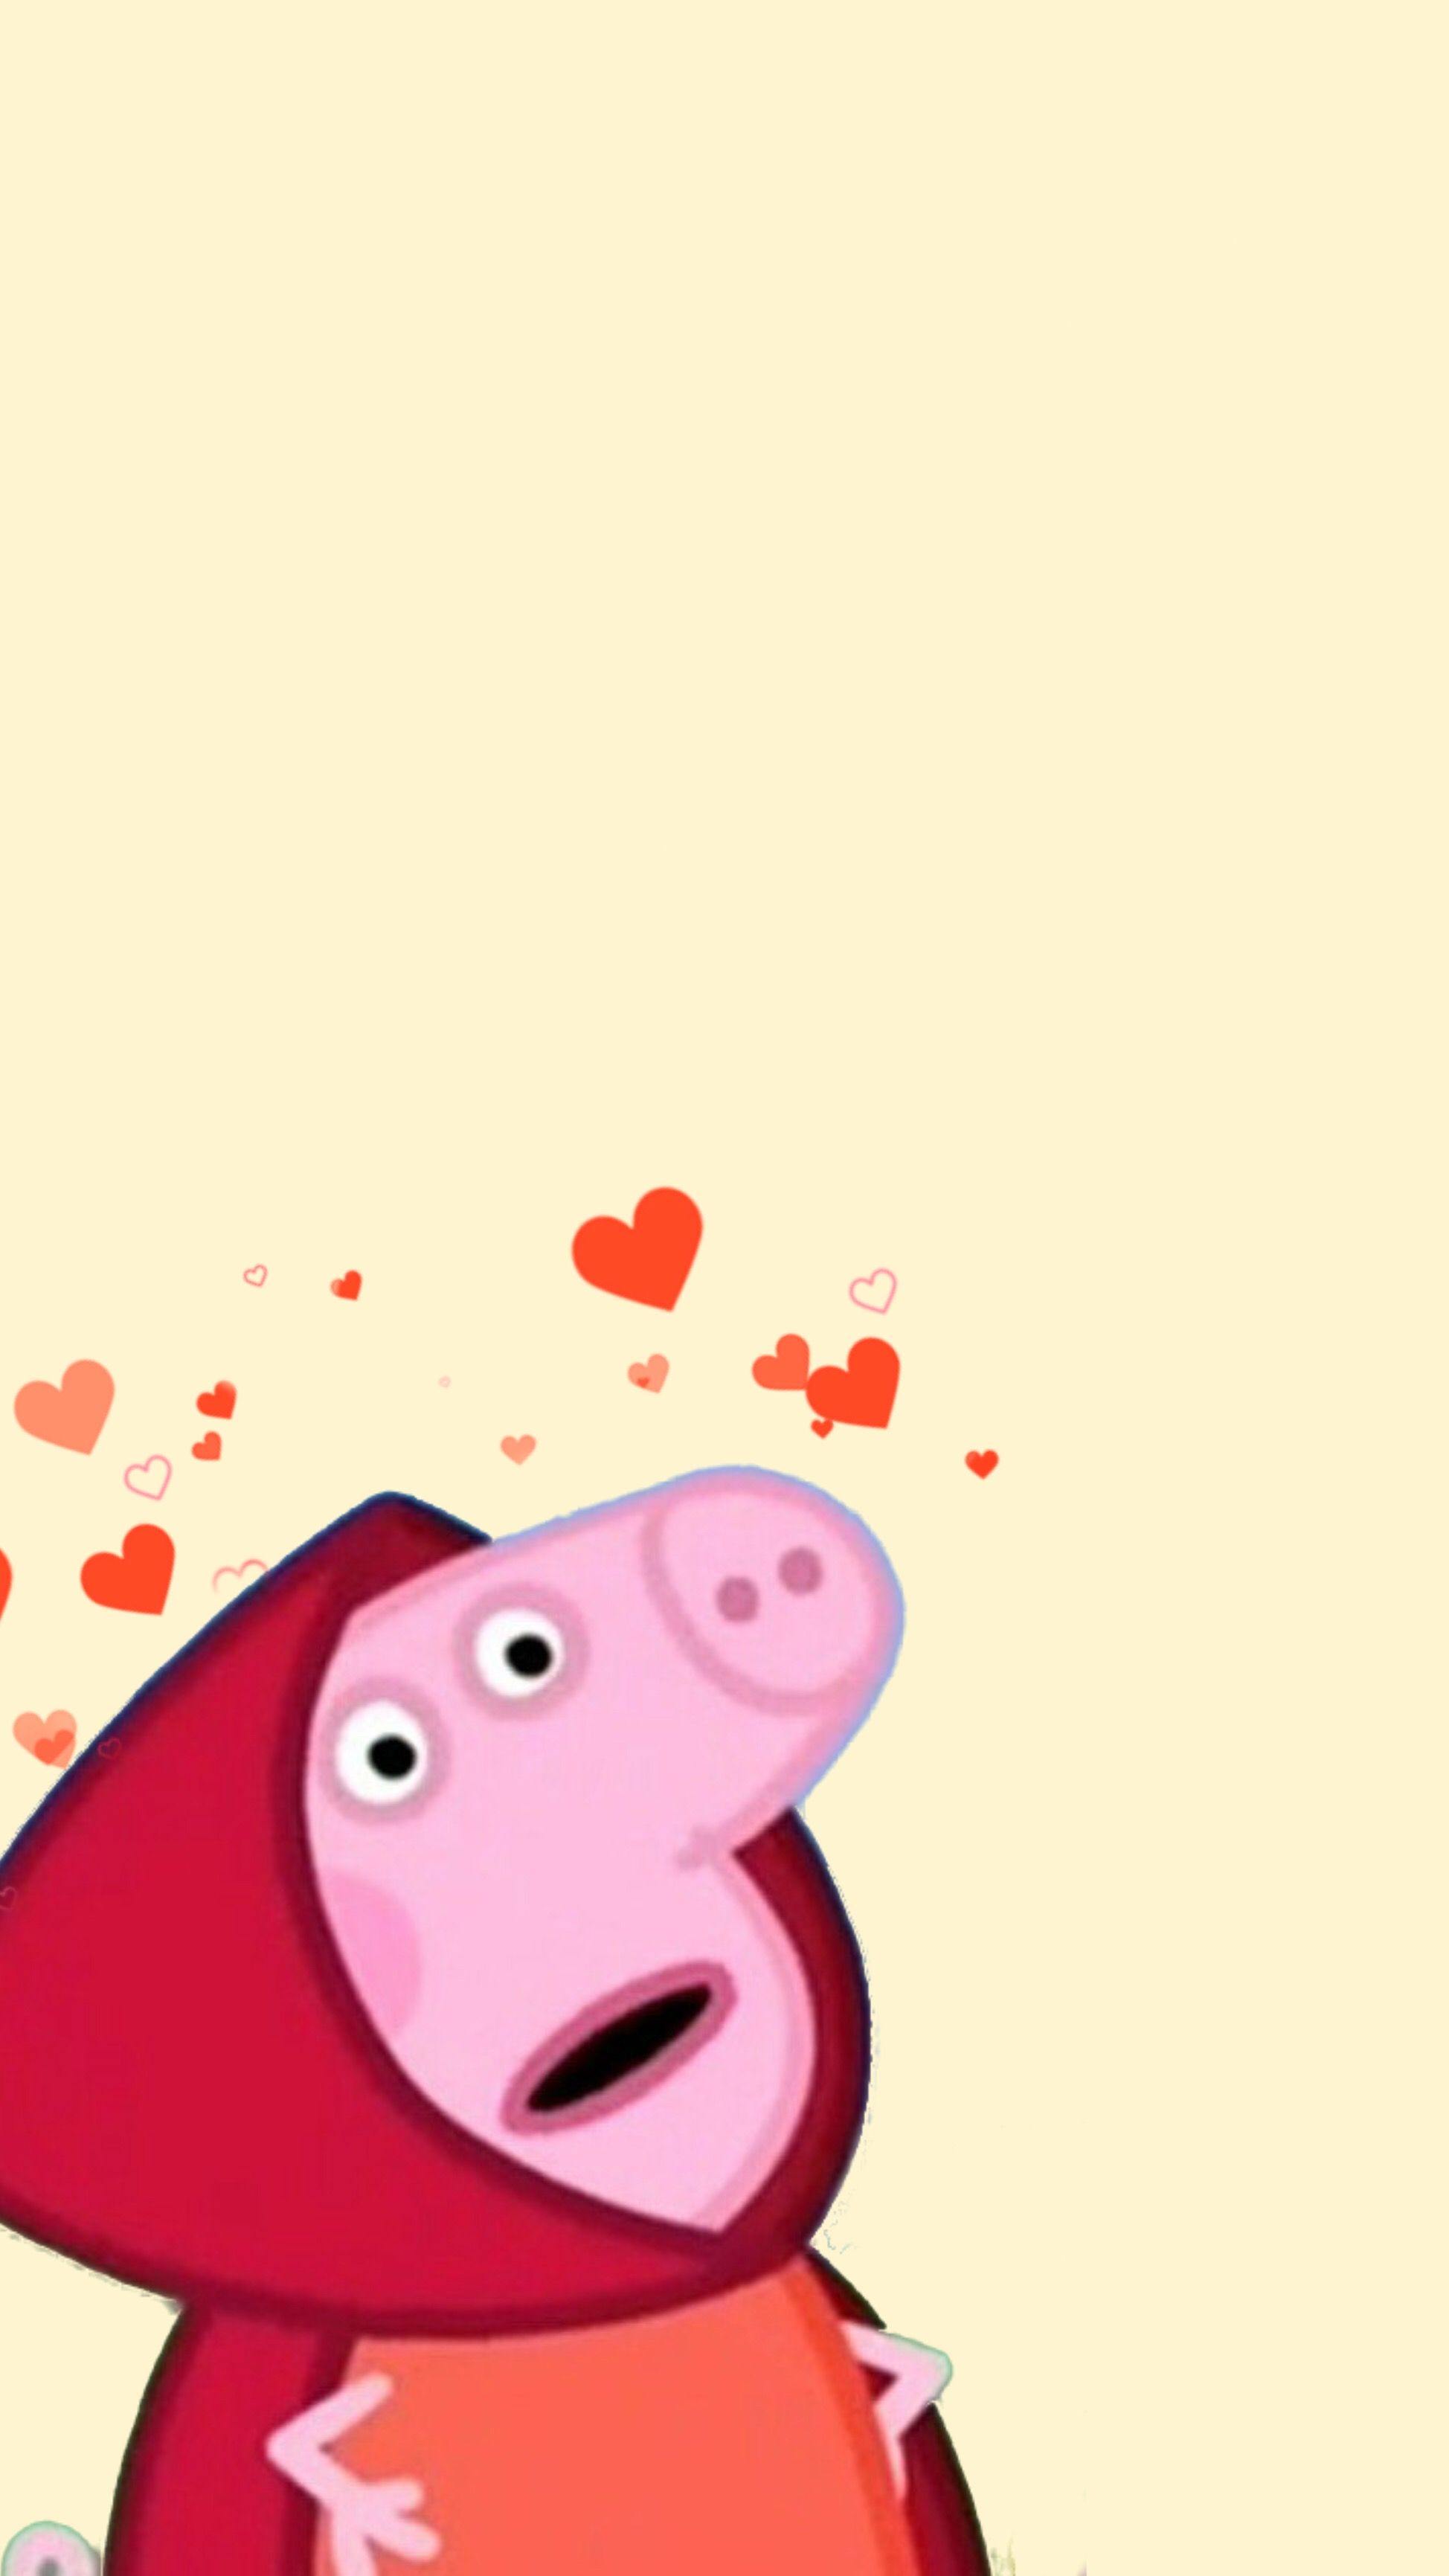 Peppa Pig Wallpapers For Iphone Aoe Fitrinis Wallpaper - Peppa Pig Aesthetic , HD Wallpaper & Backgrounds